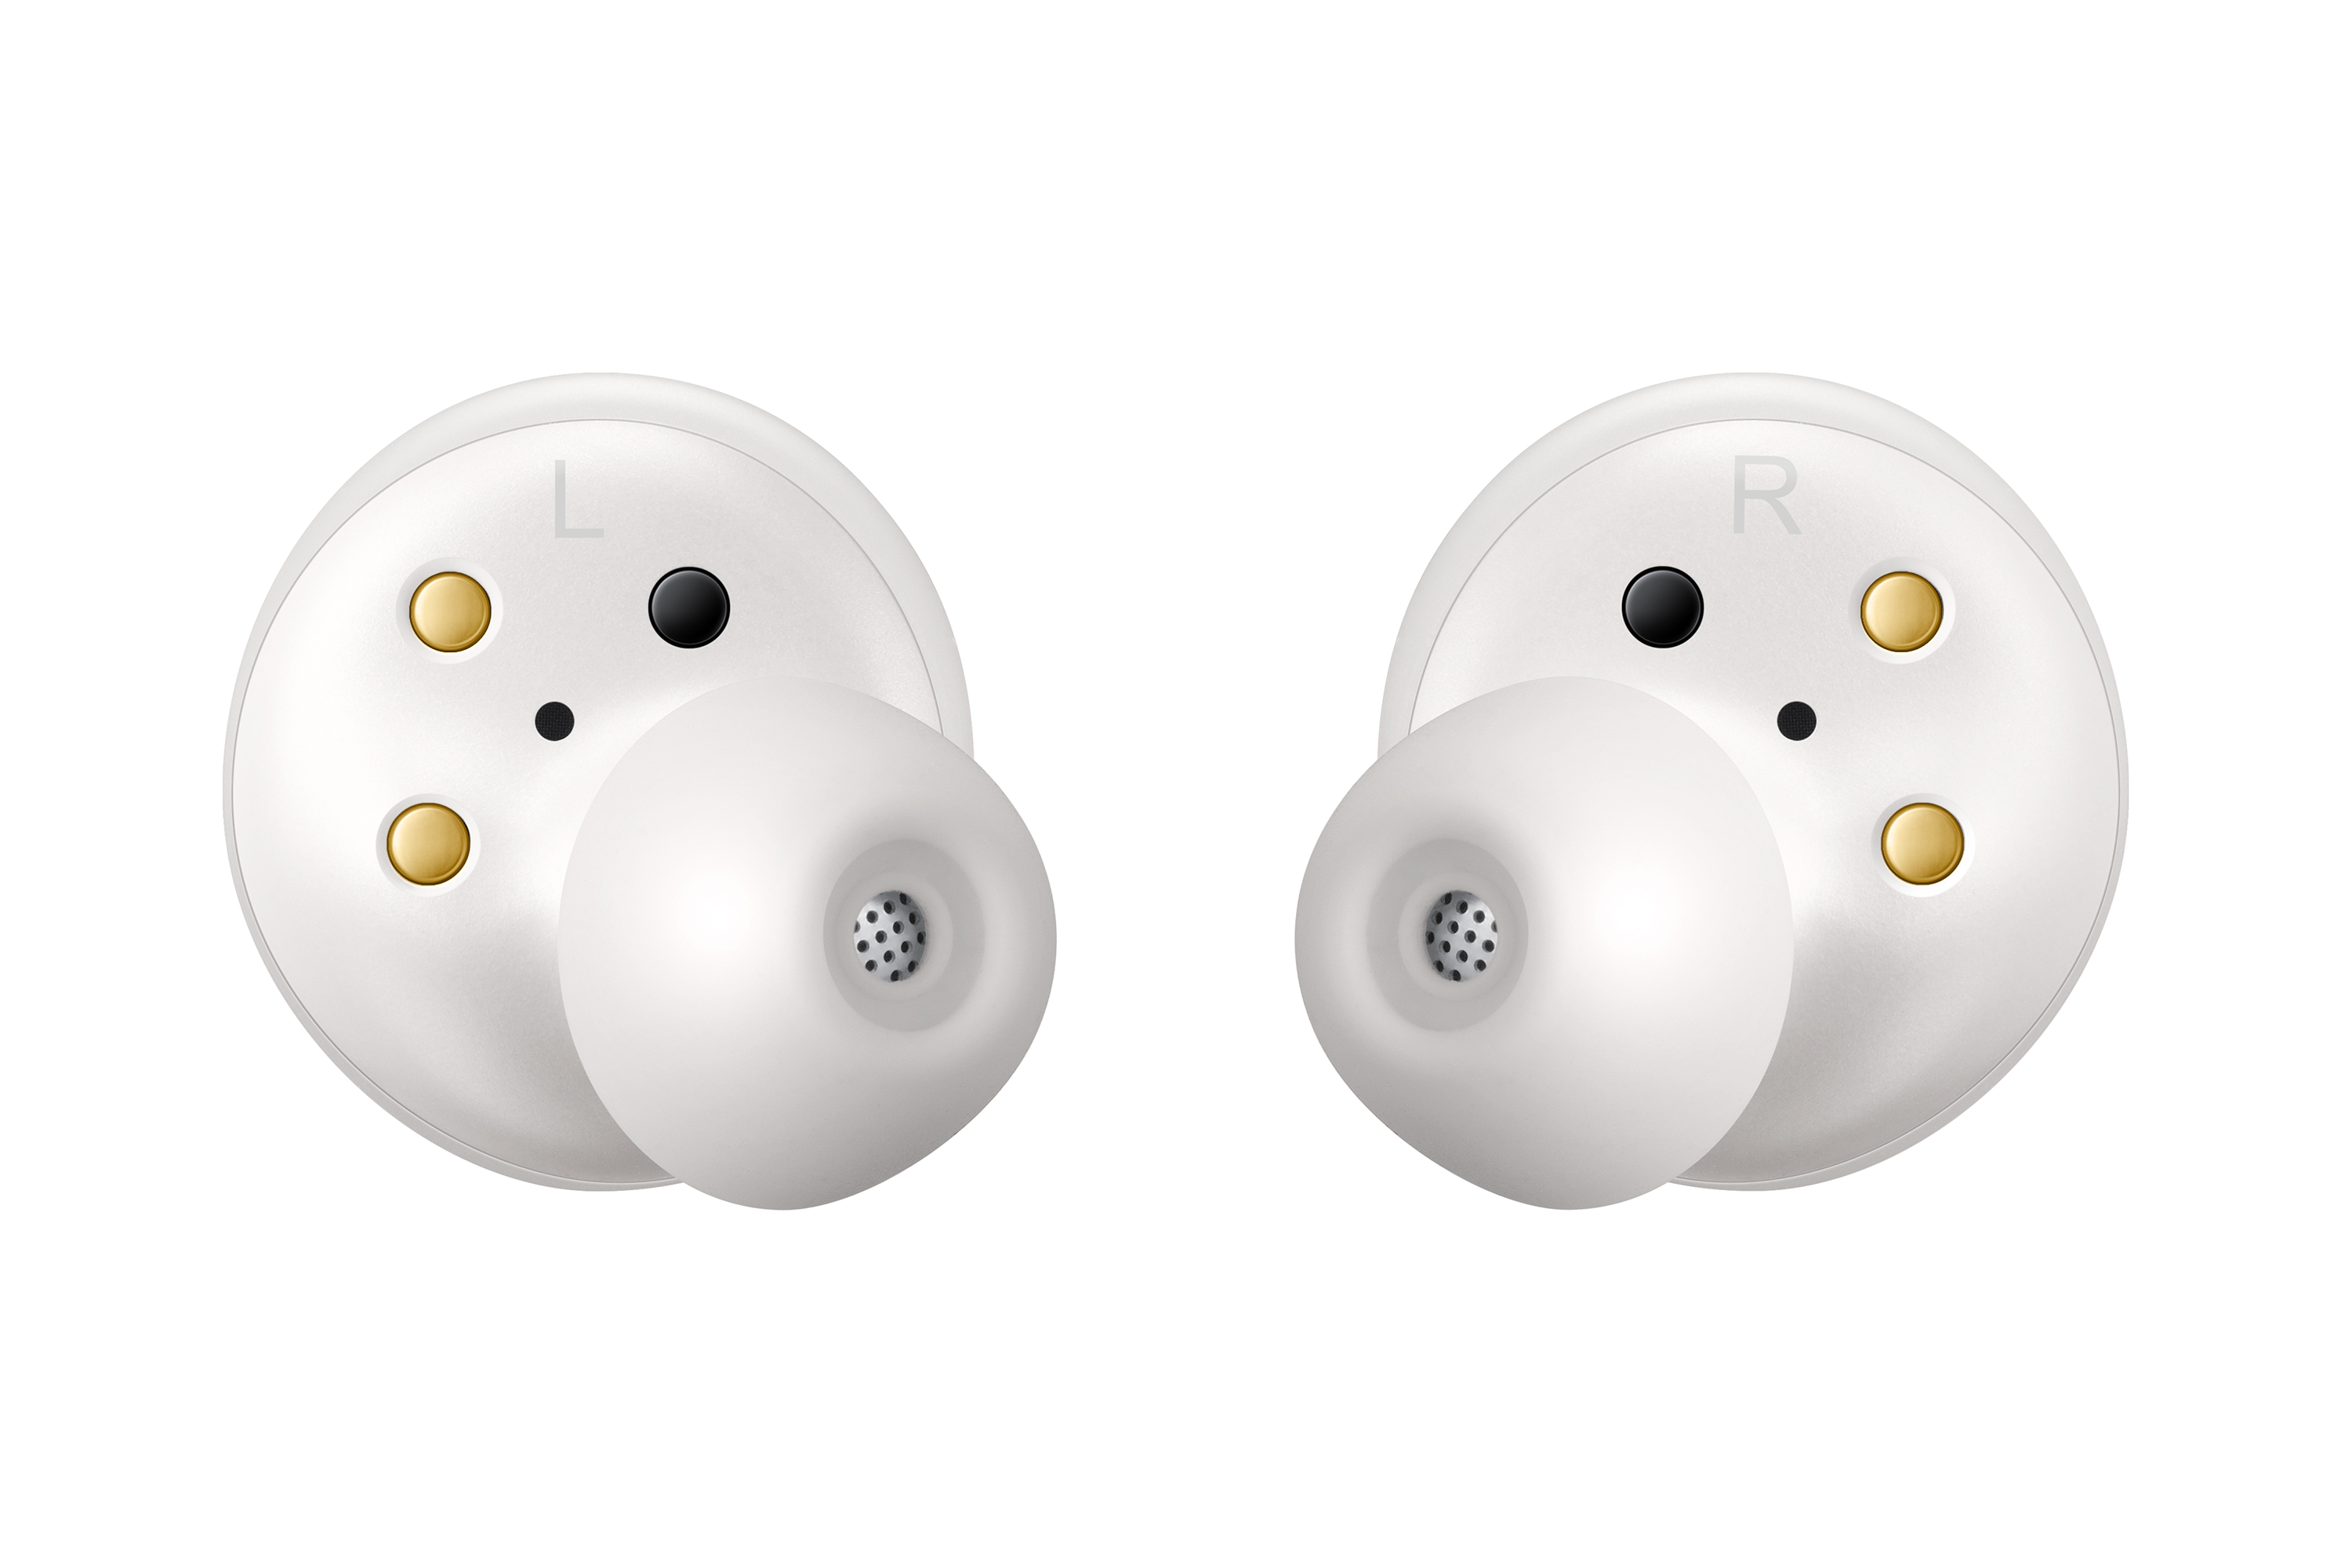 SAMSUNG Galaxy Buds, White (Charging Case Included) - image 13 of 17